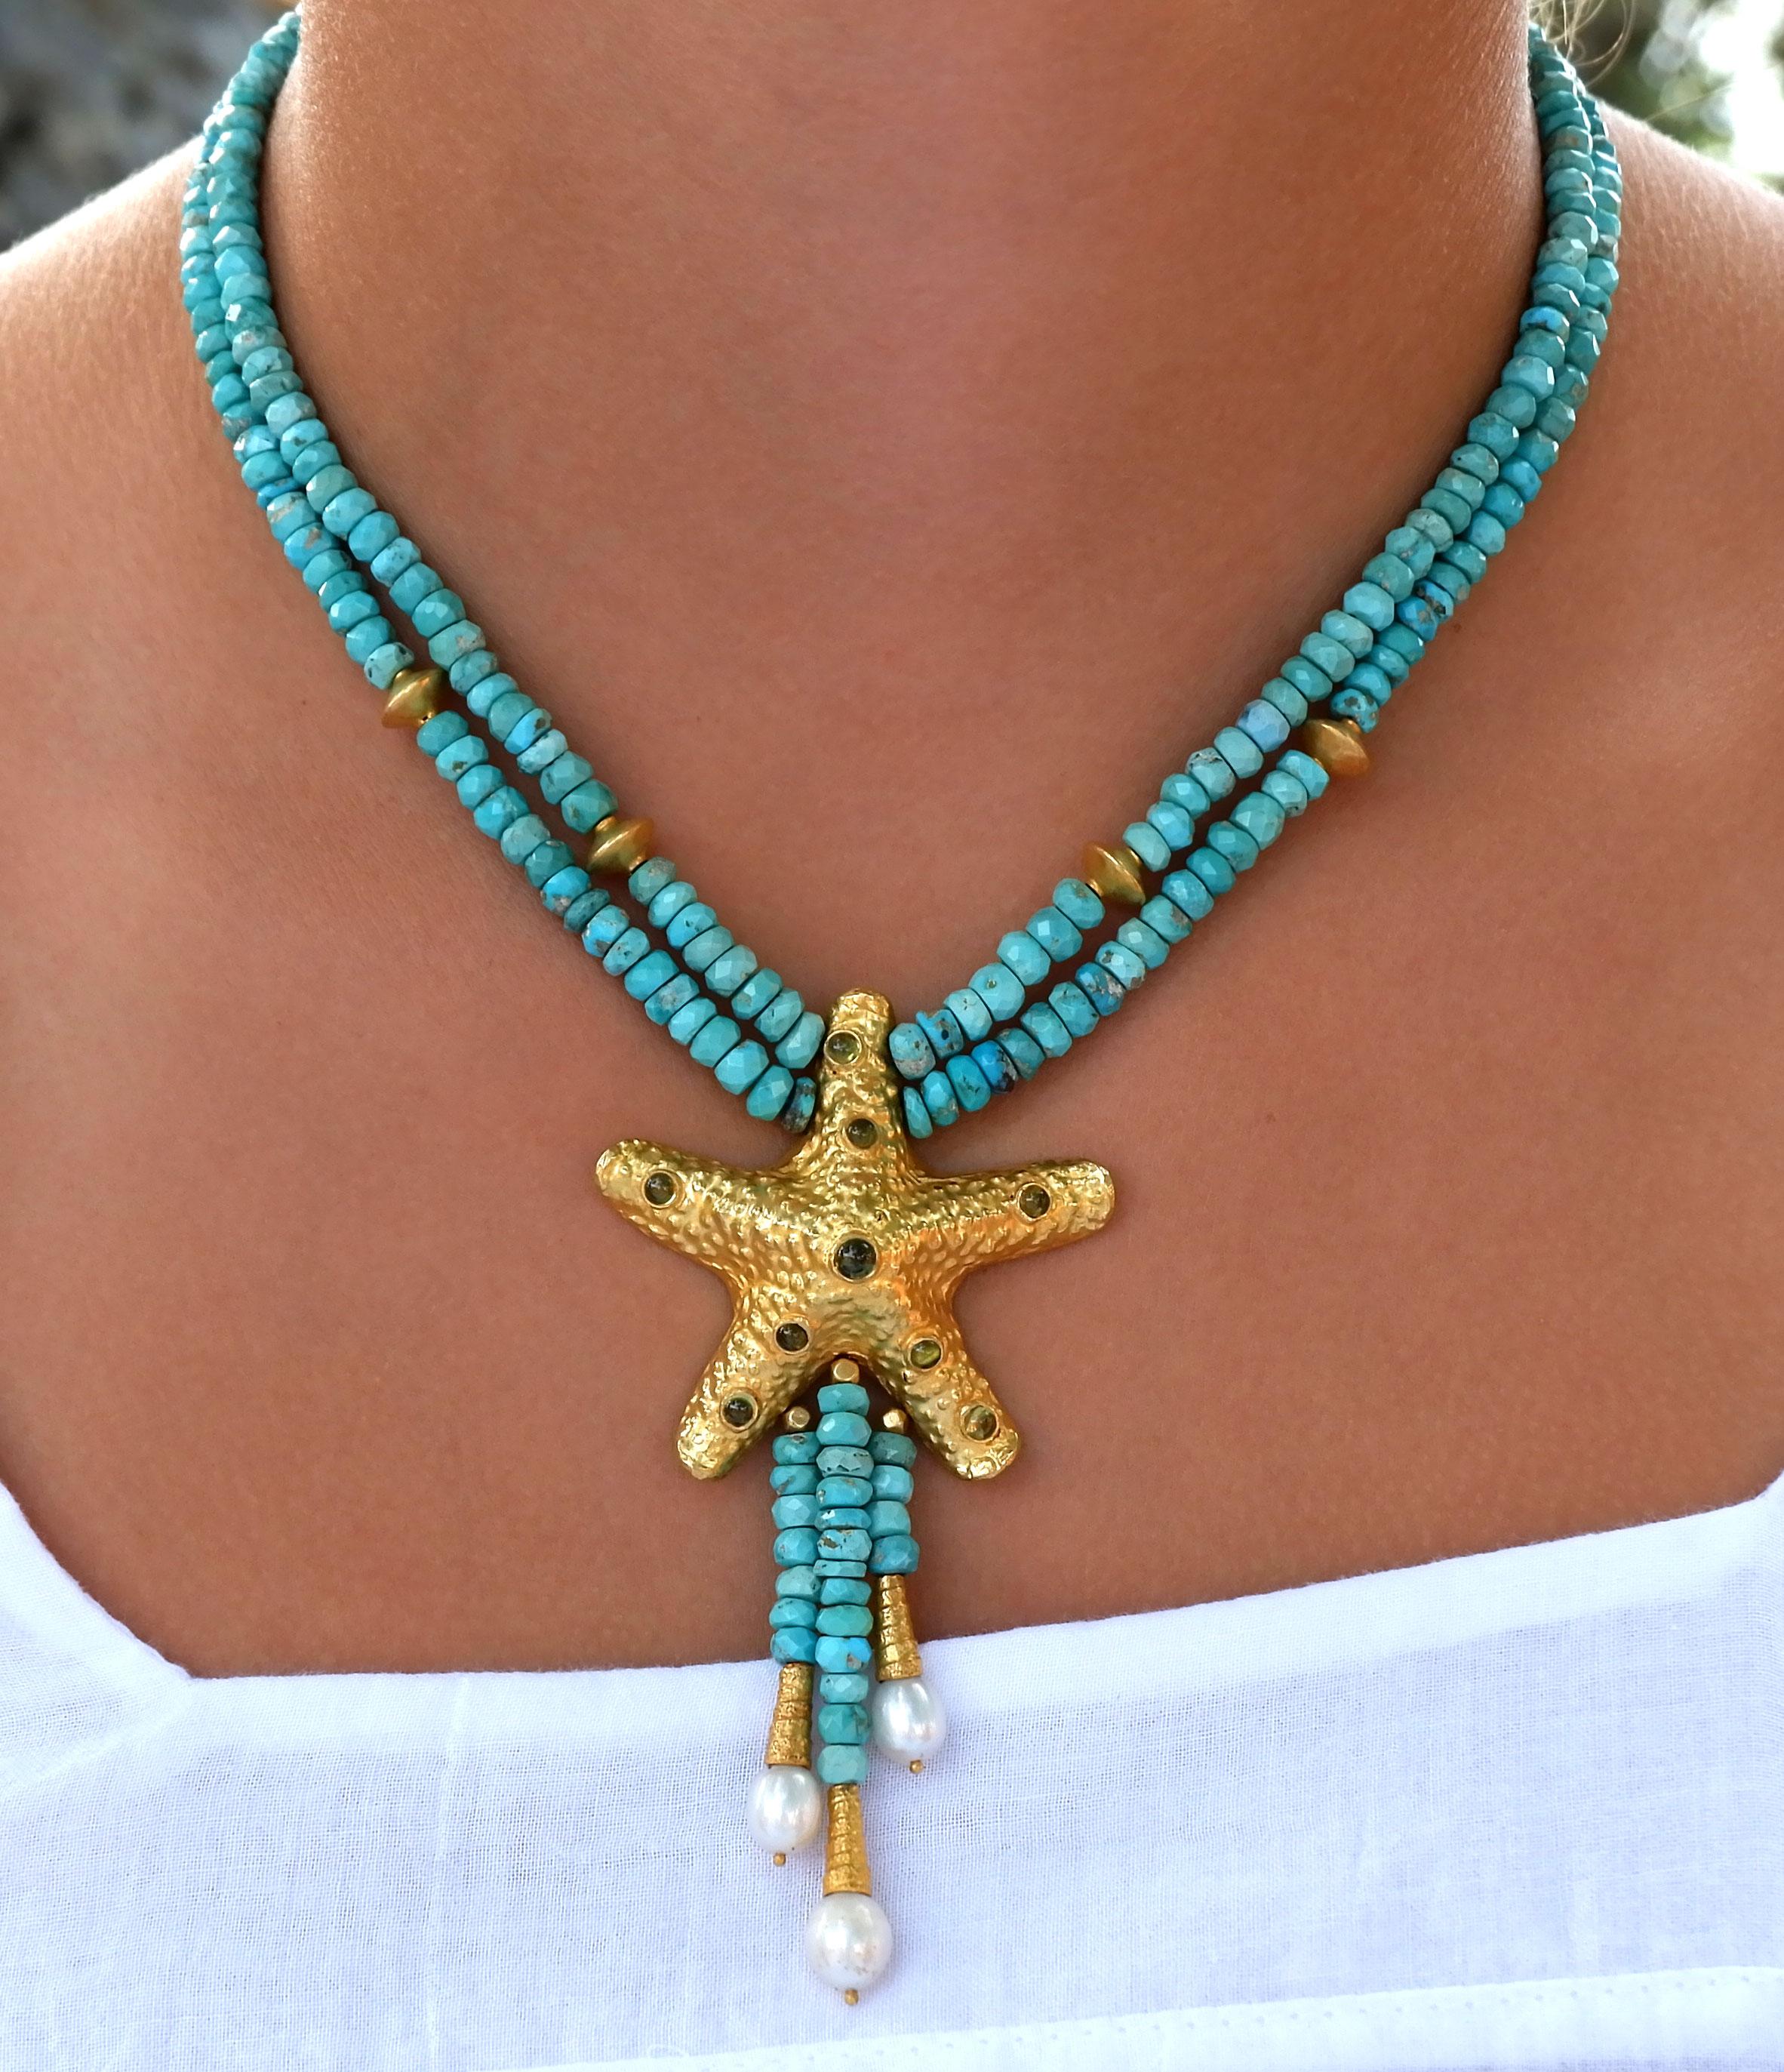 Gorgeous and unique Turquoise starfish necklace: The ideal accessory for a cruise or a tropical island, this necklace can just as easily be worn on the beach as for a gala dinner in the city. Any attire will look interesting and elegant with this